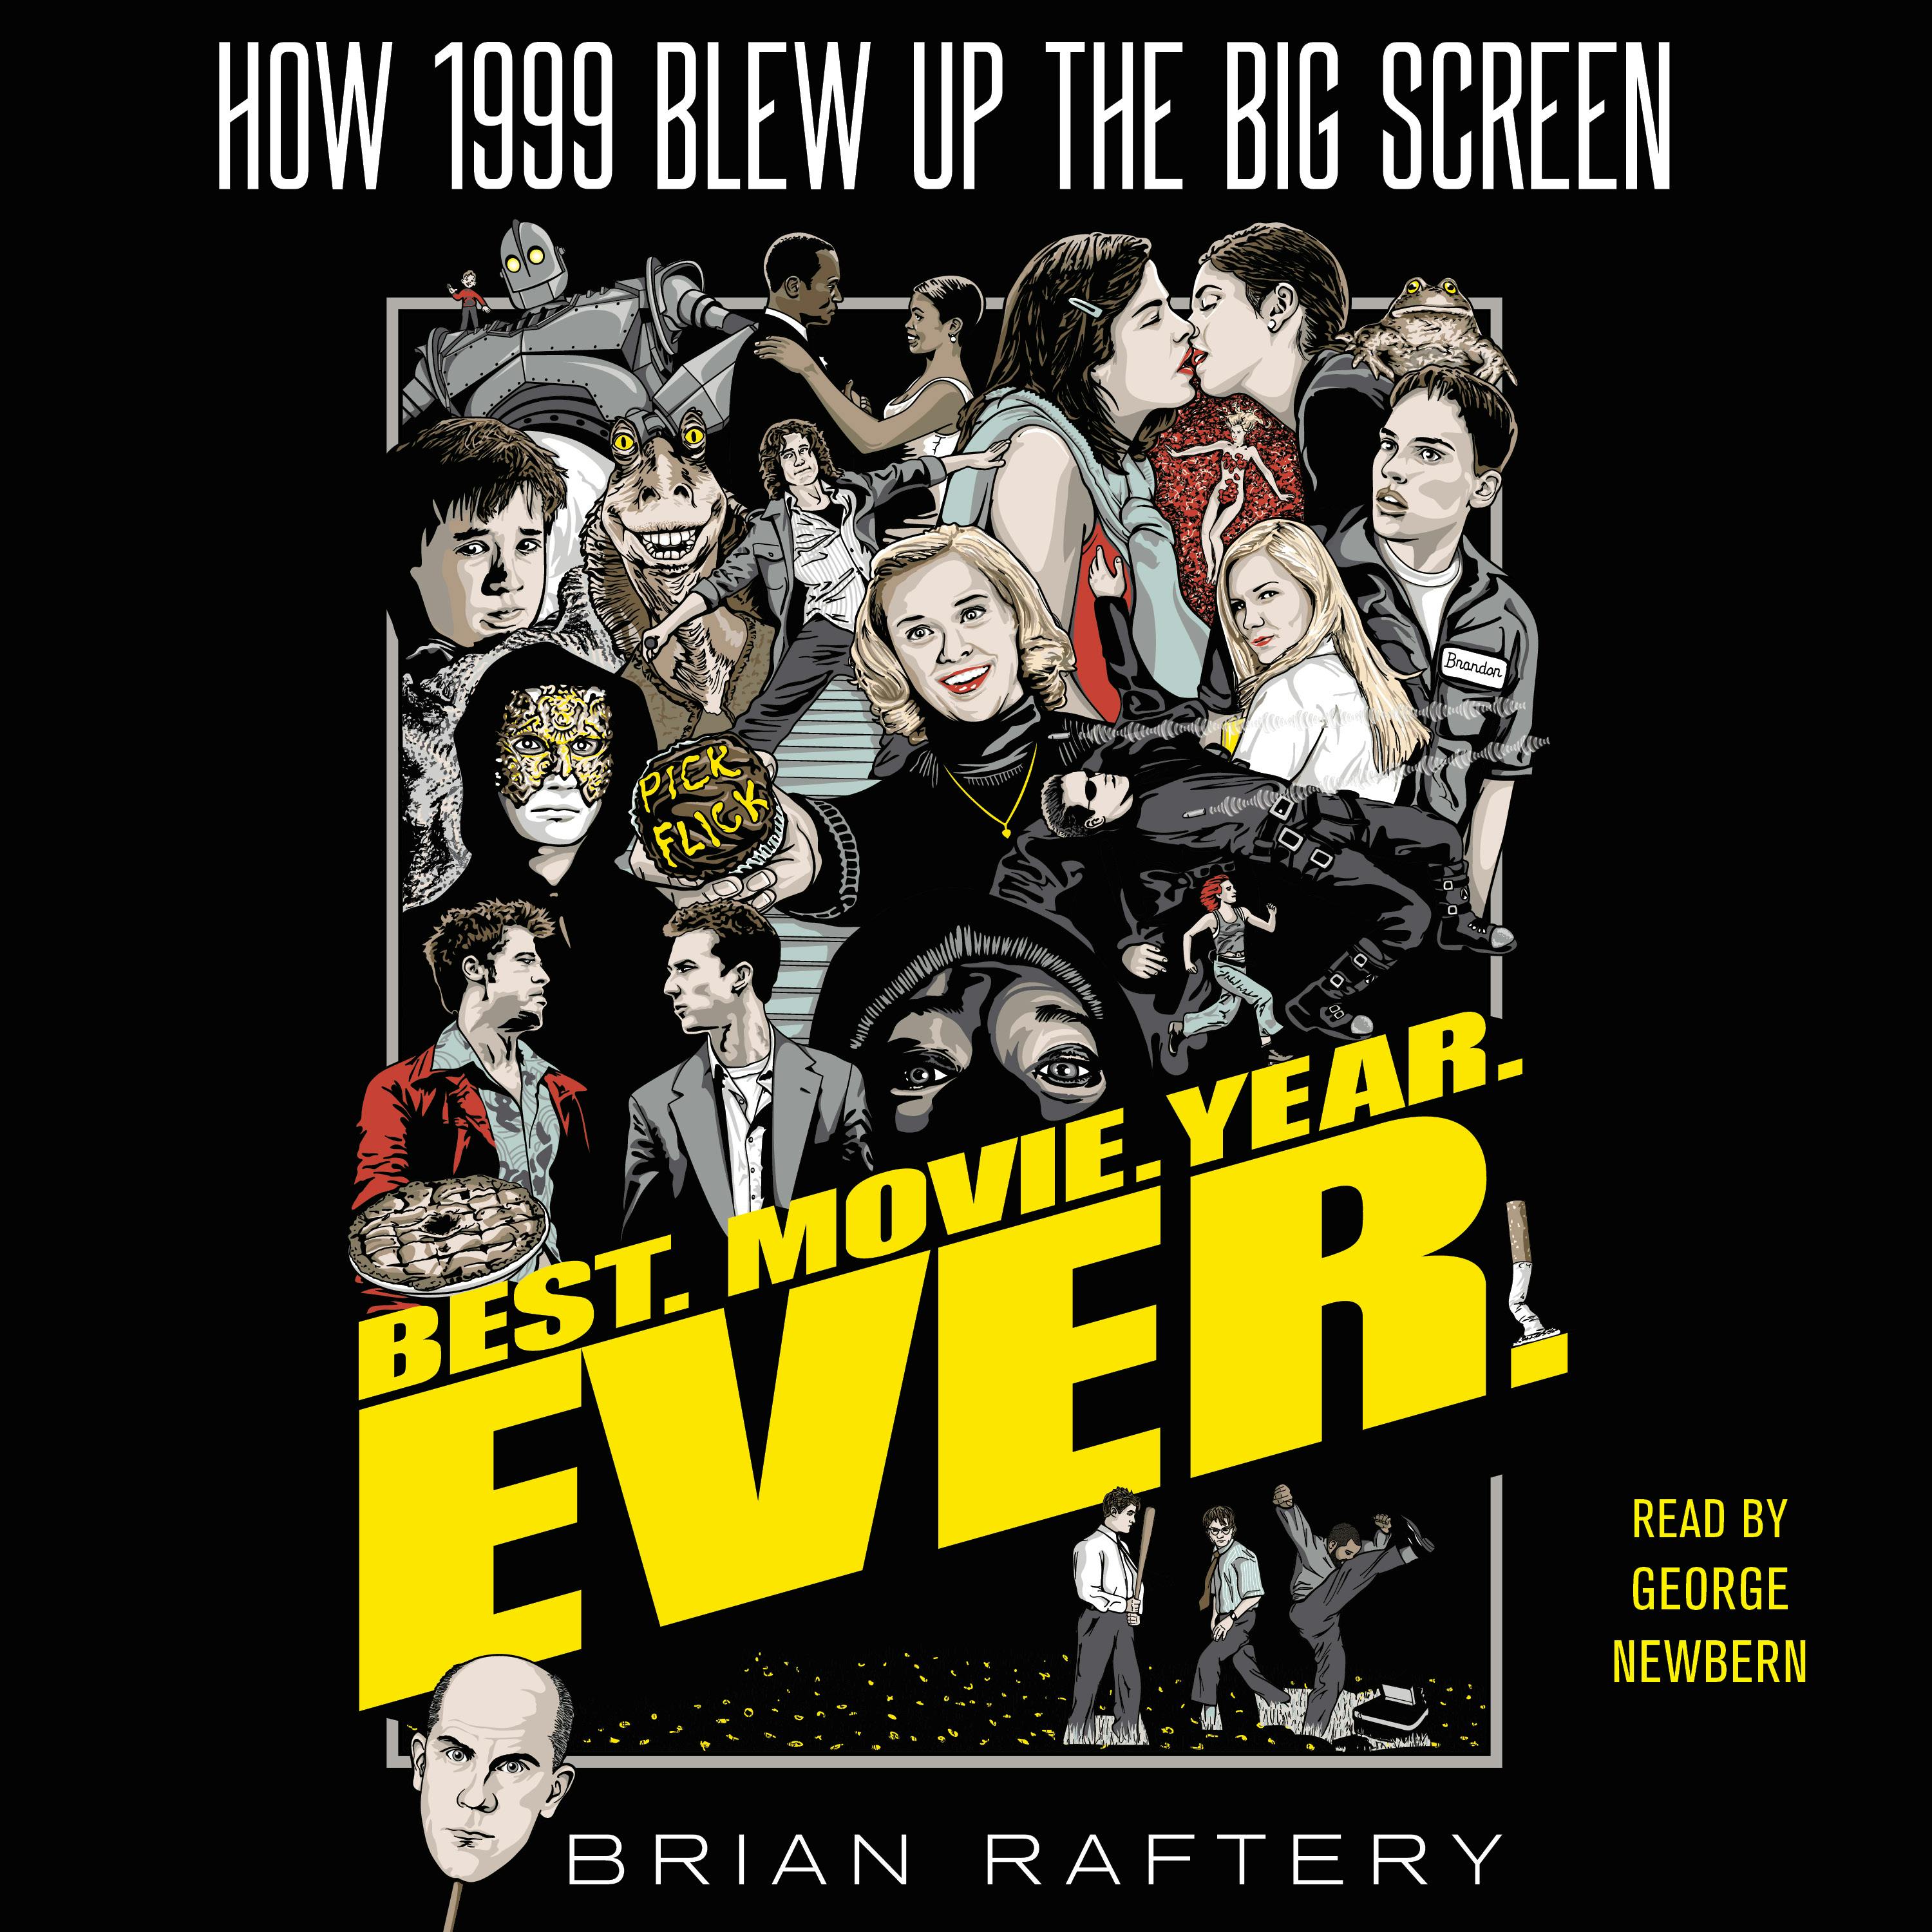 Best. Movie. Year. Ever.: How 1999 Blew Up the Big Screen - Brian Raftery